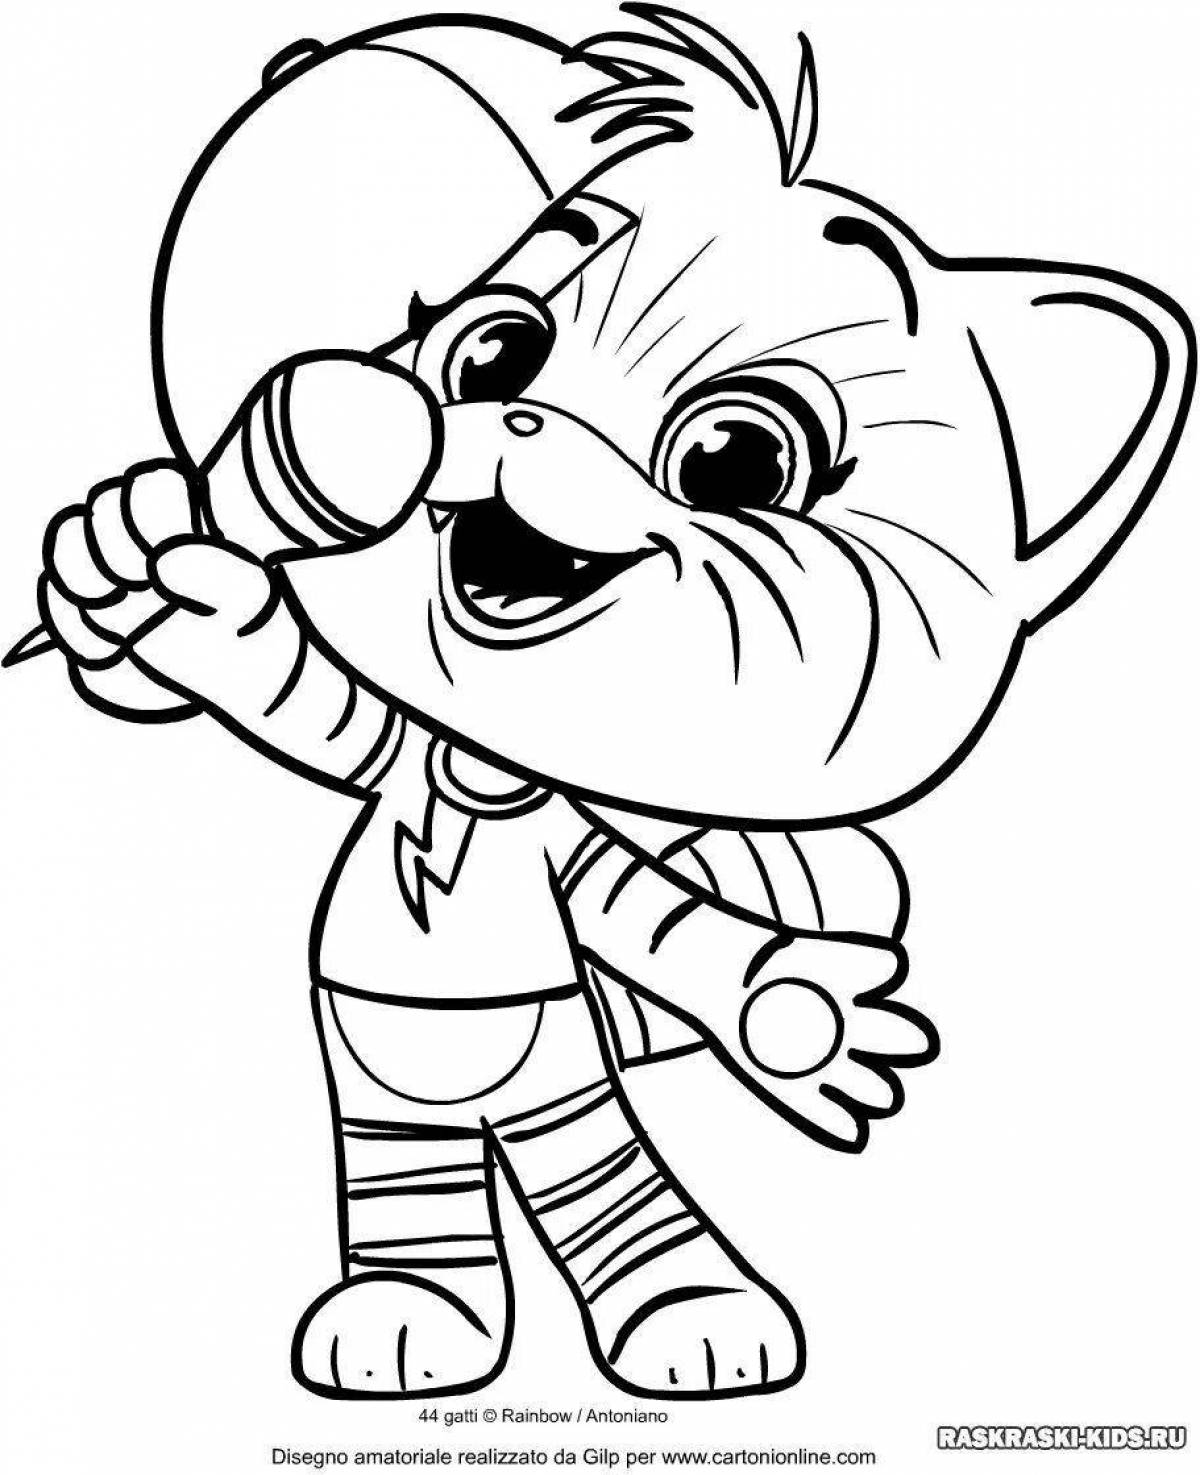 Exciting mrrr meow coloring page